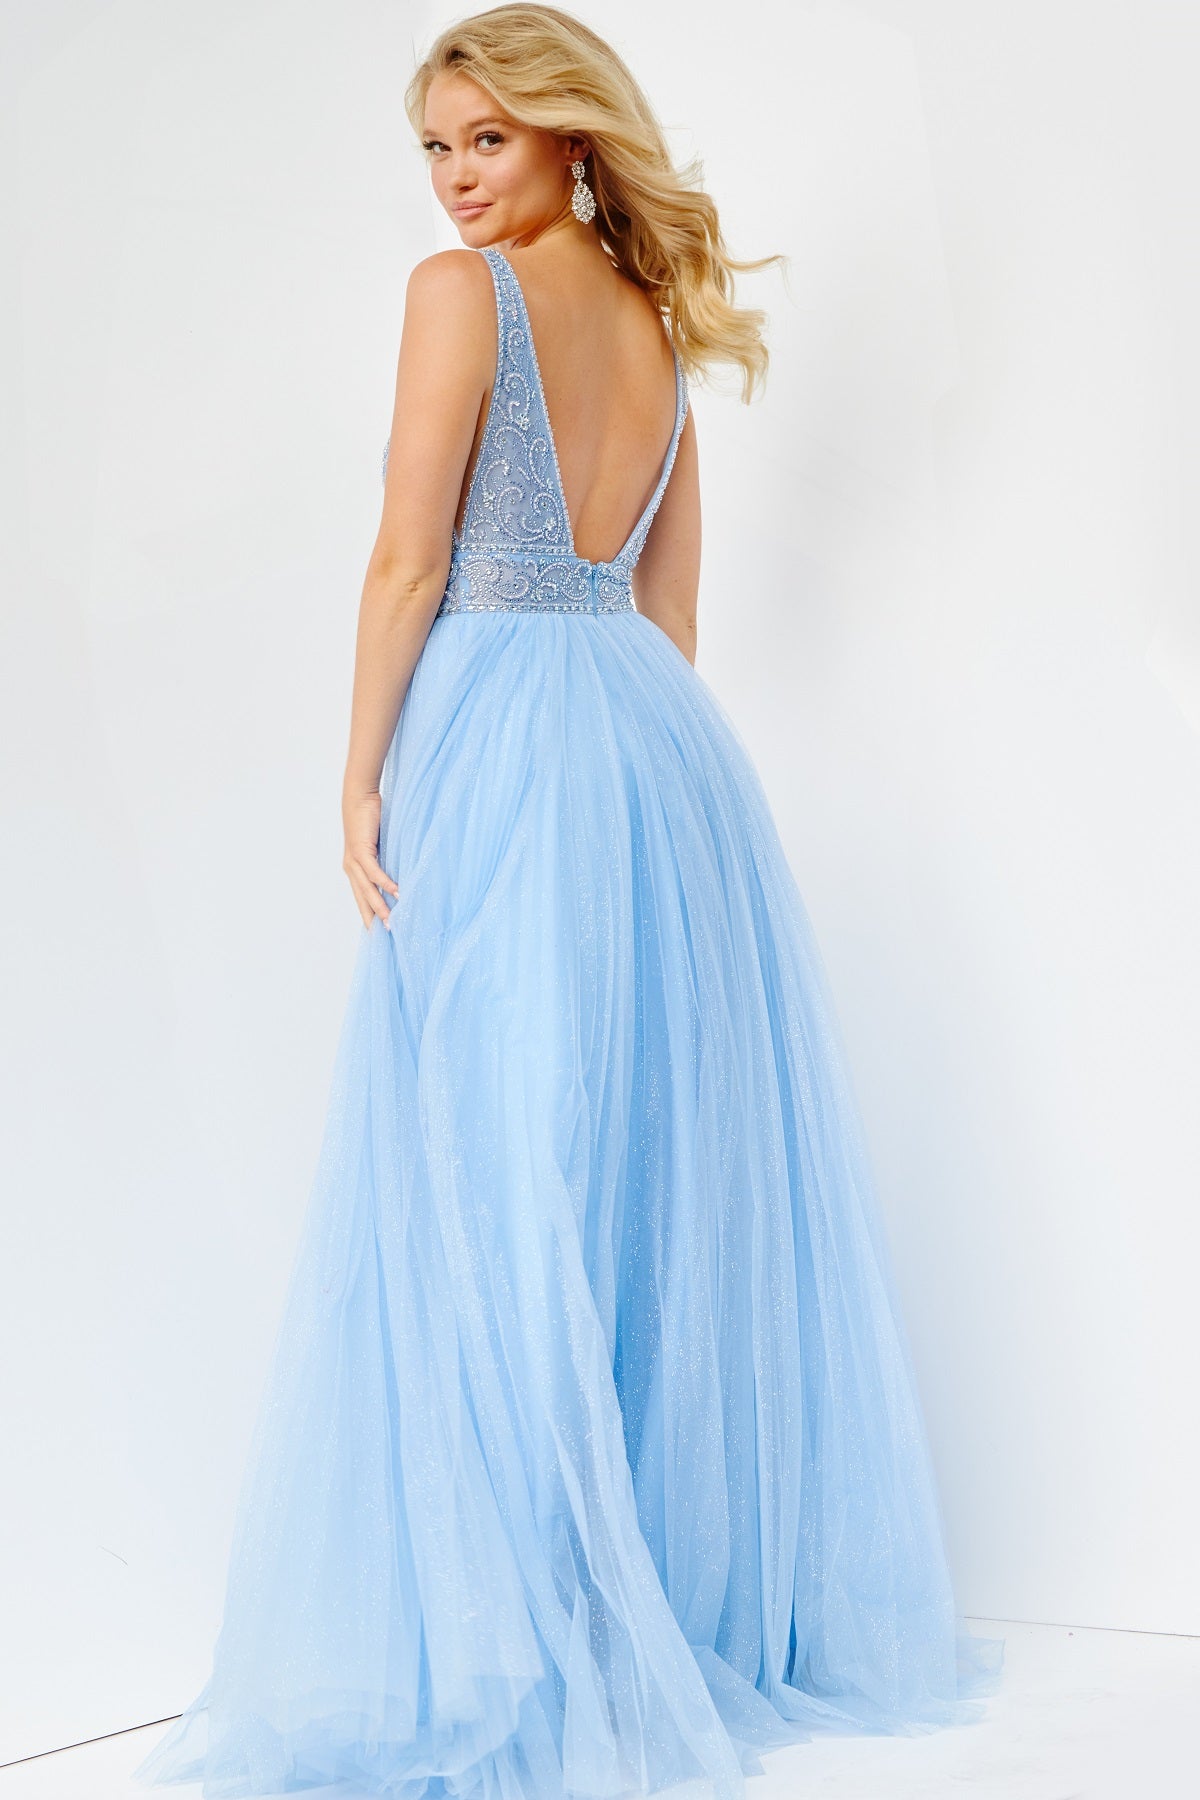 Jovani JVN05818 - JVN 05818 is a Gorgeous Long Glittering Tulle A Line ballgown prom dress. Featuring a sheer Fitted V Neckline bodice with crystal rhinestone embellishments. Open V Back. Look like a princess in this stunning formal evening gown.